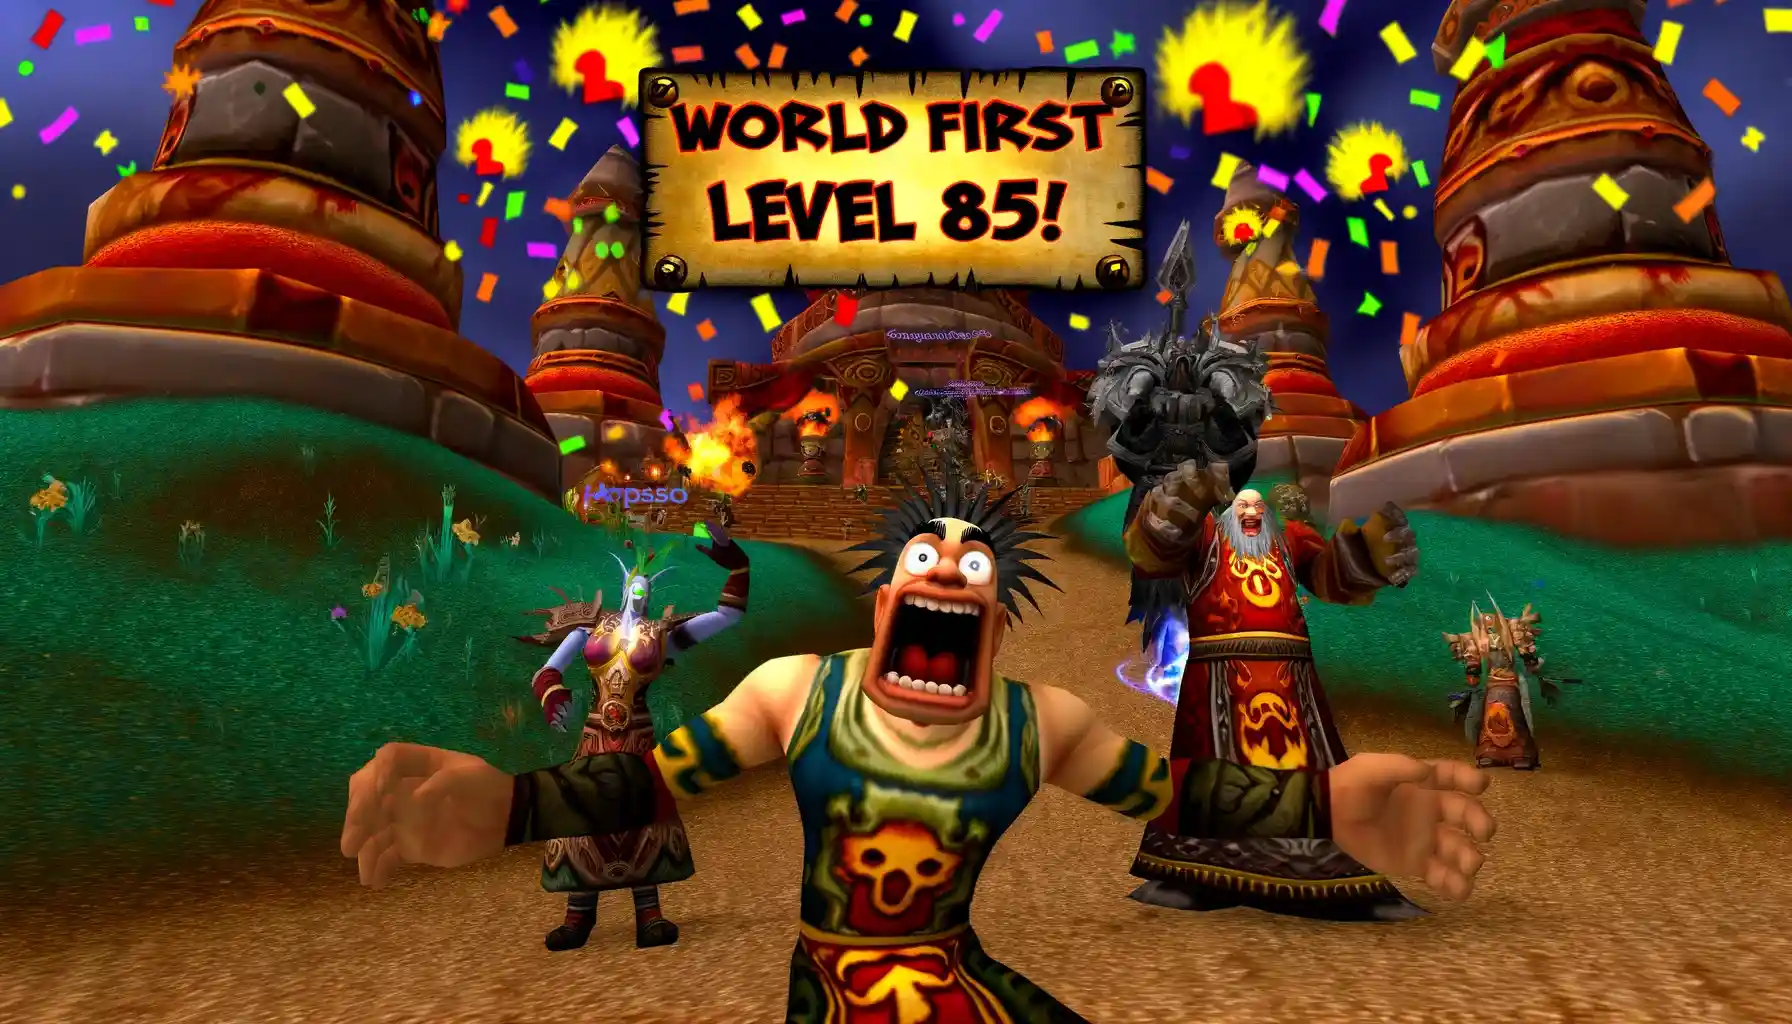 Cataclysm Classic World First Level 85 Achieved By Lmgd1 In Under 3 Hours